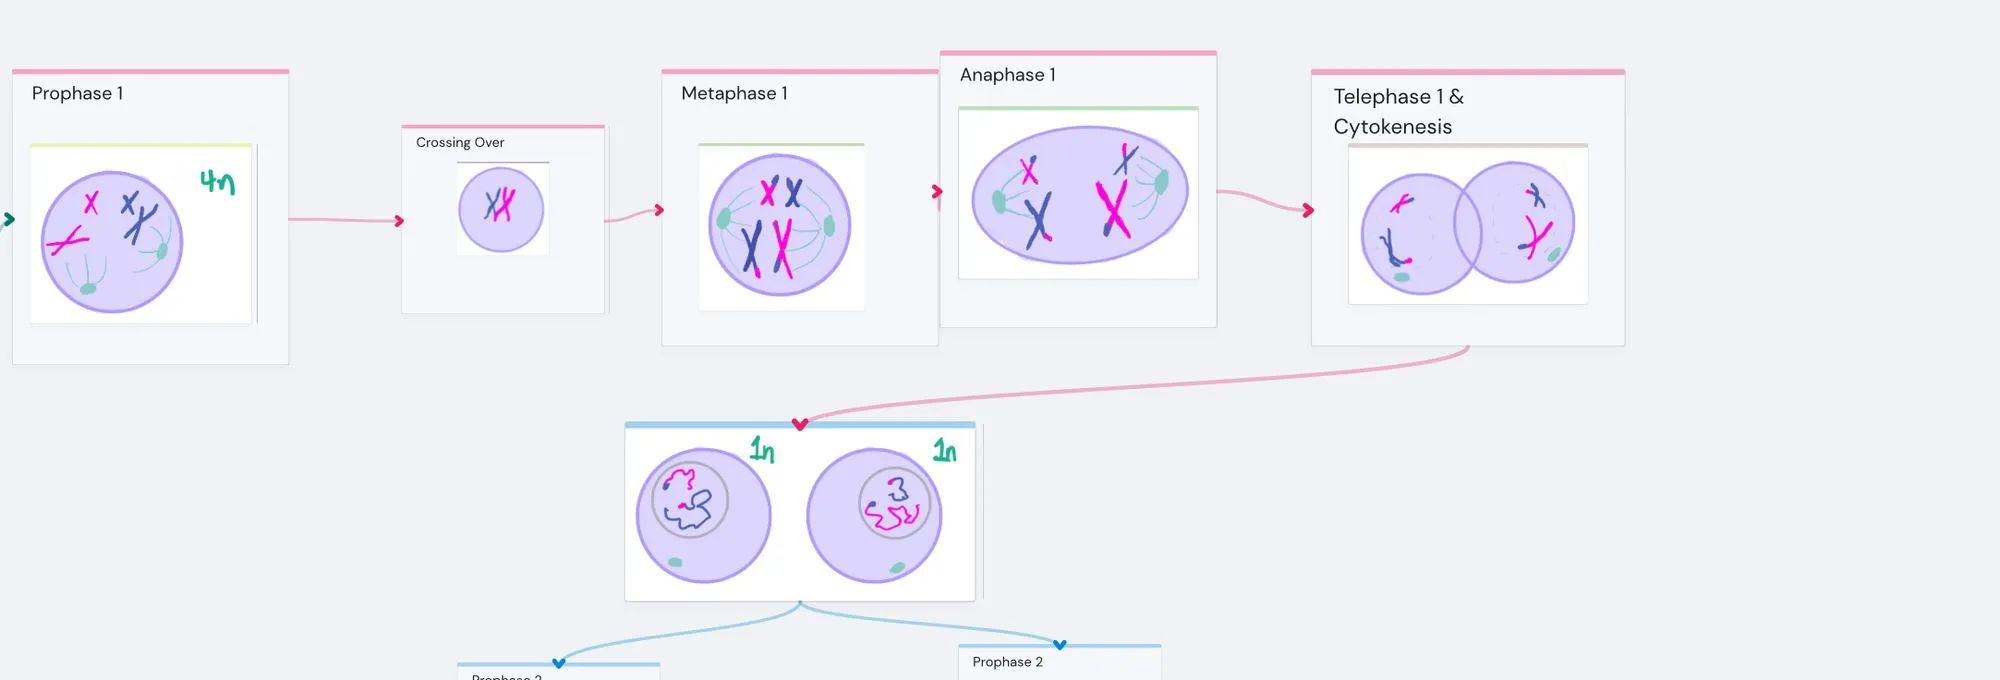 Meiosis Stages